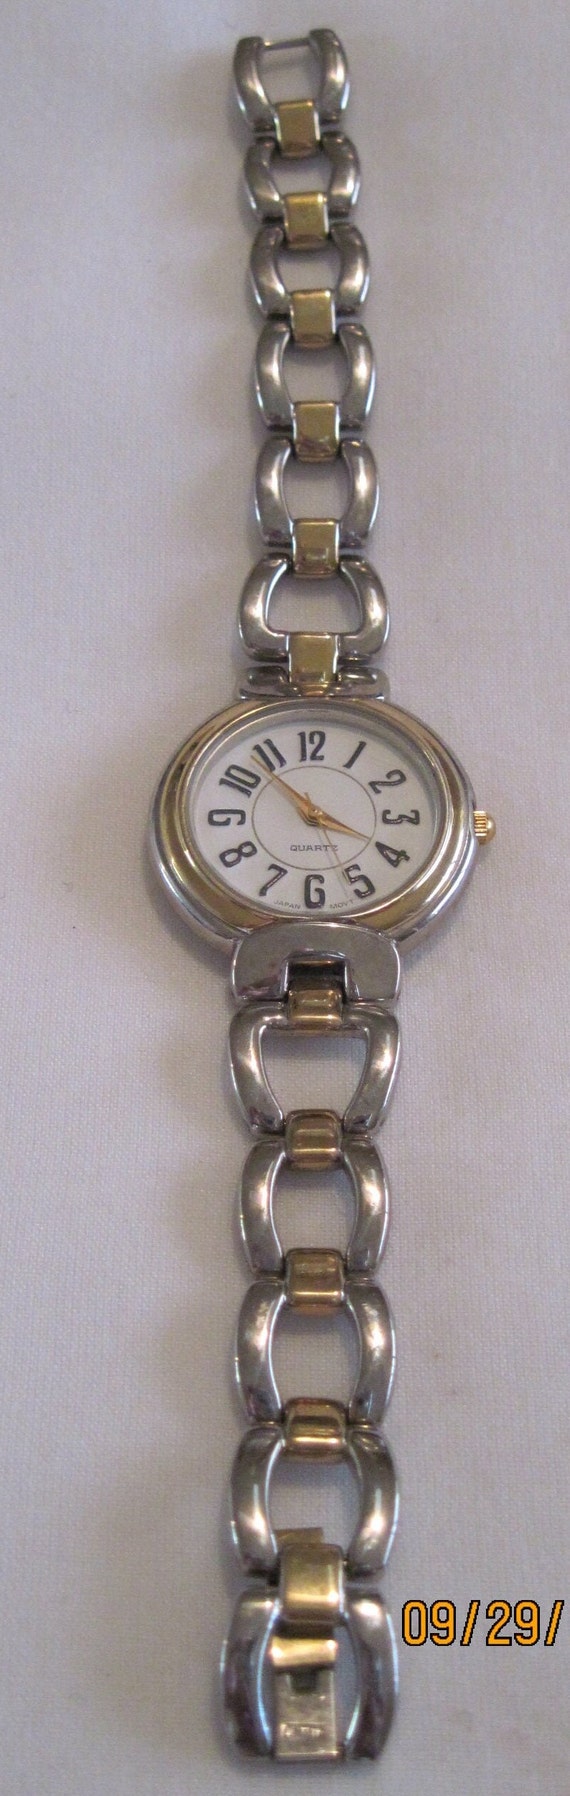 Vintage Silver & Gold Link Watch w/ Round Face ...